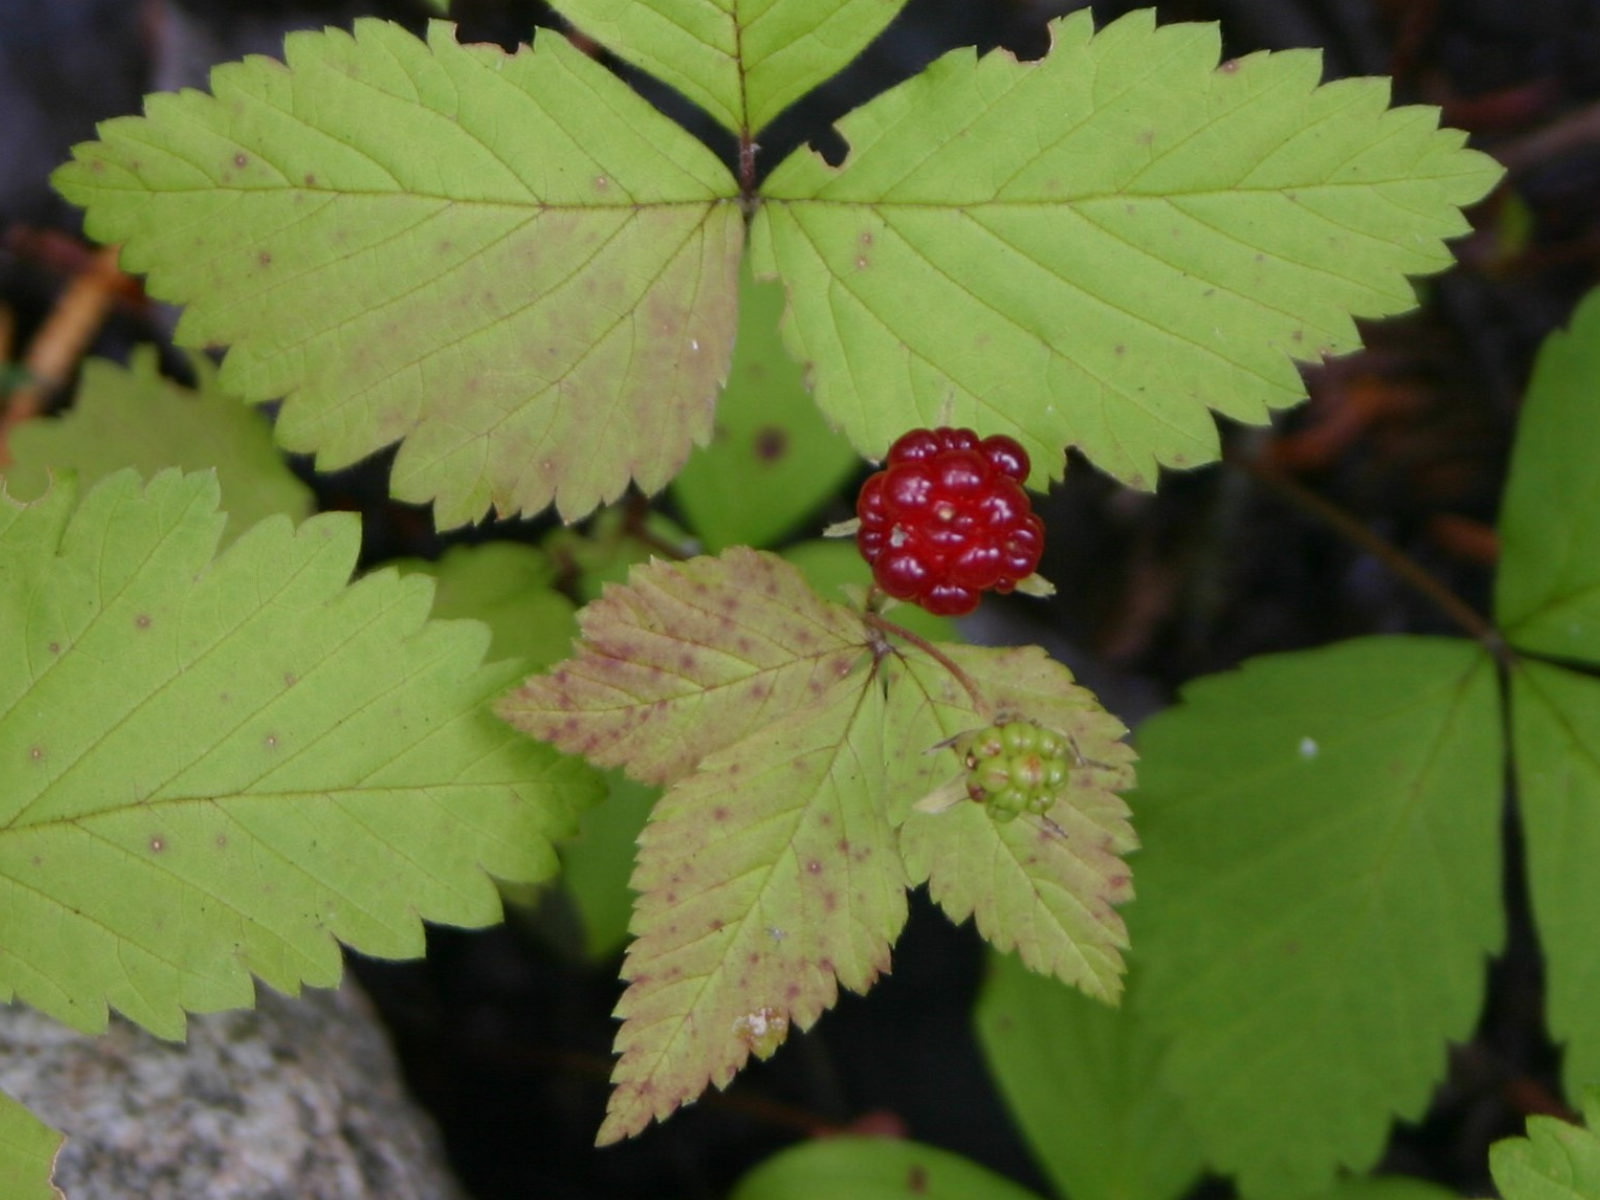 A red raspberry growing among green leaves.